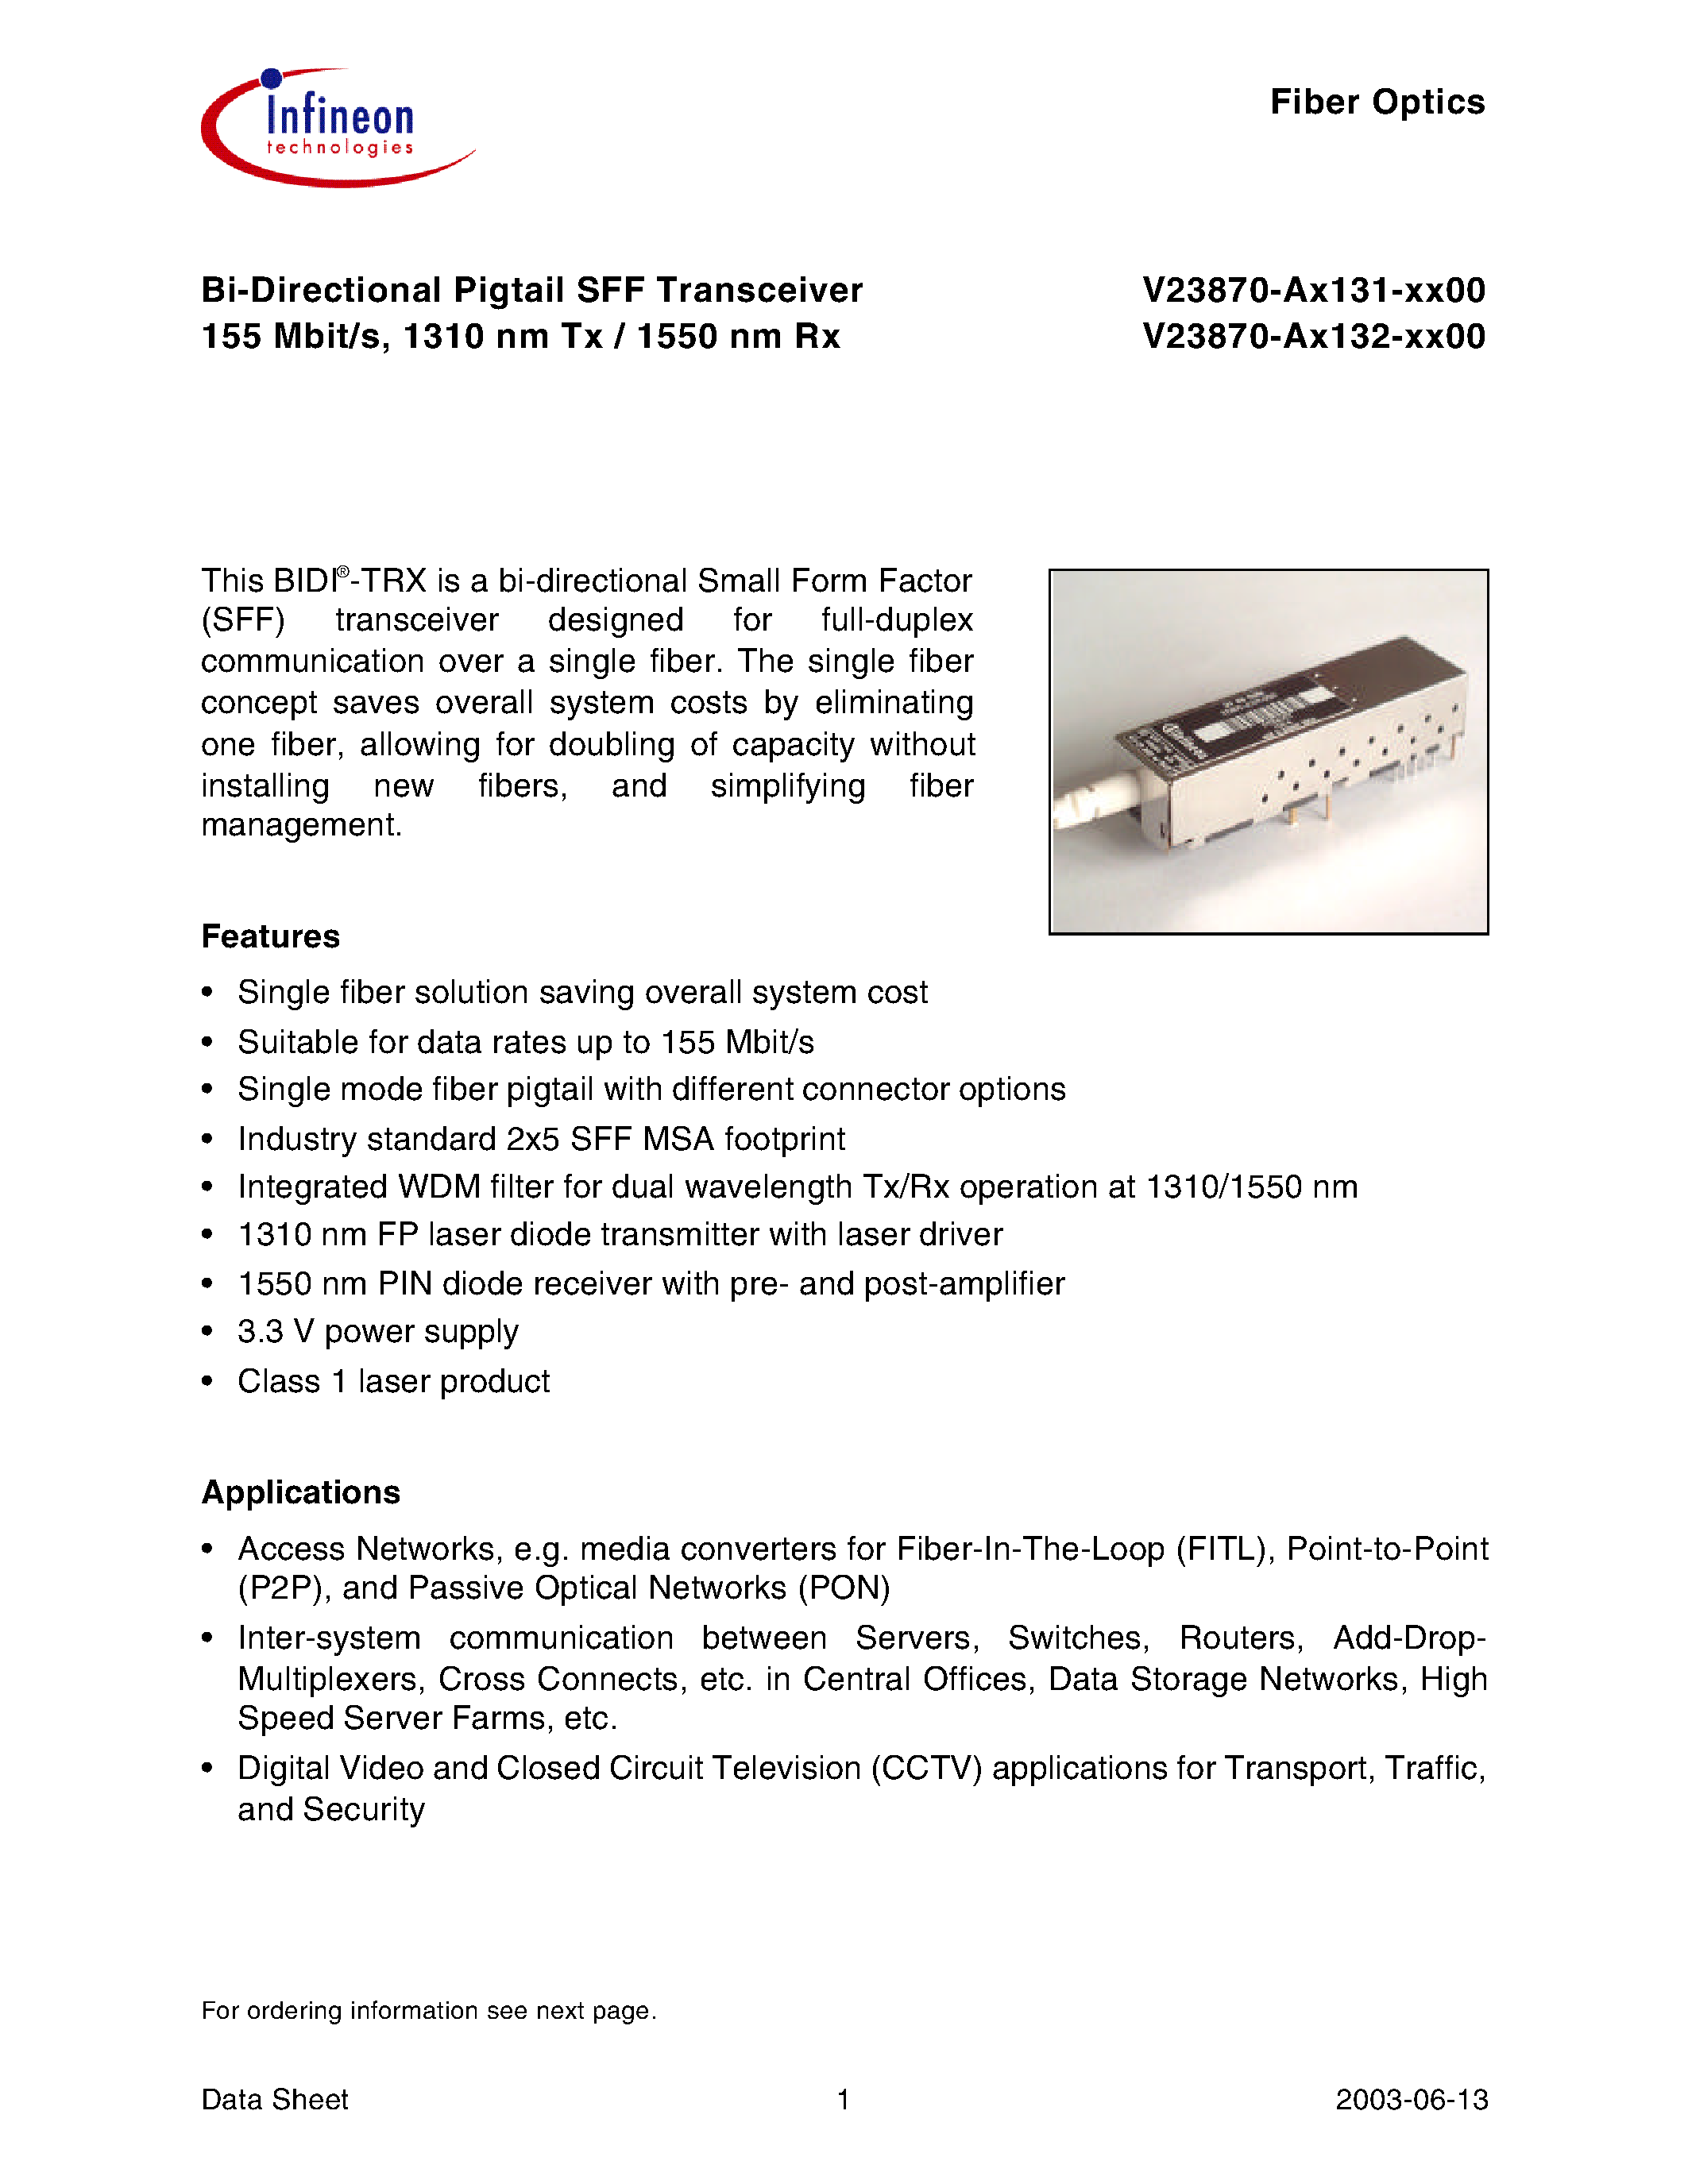 Datasheet V23870-A1131-B200 - Bi-Directional Pigtail SFF Transceiver 155 Mbit/s/ 1310 nm Tx / 1550 nm Rx page 1